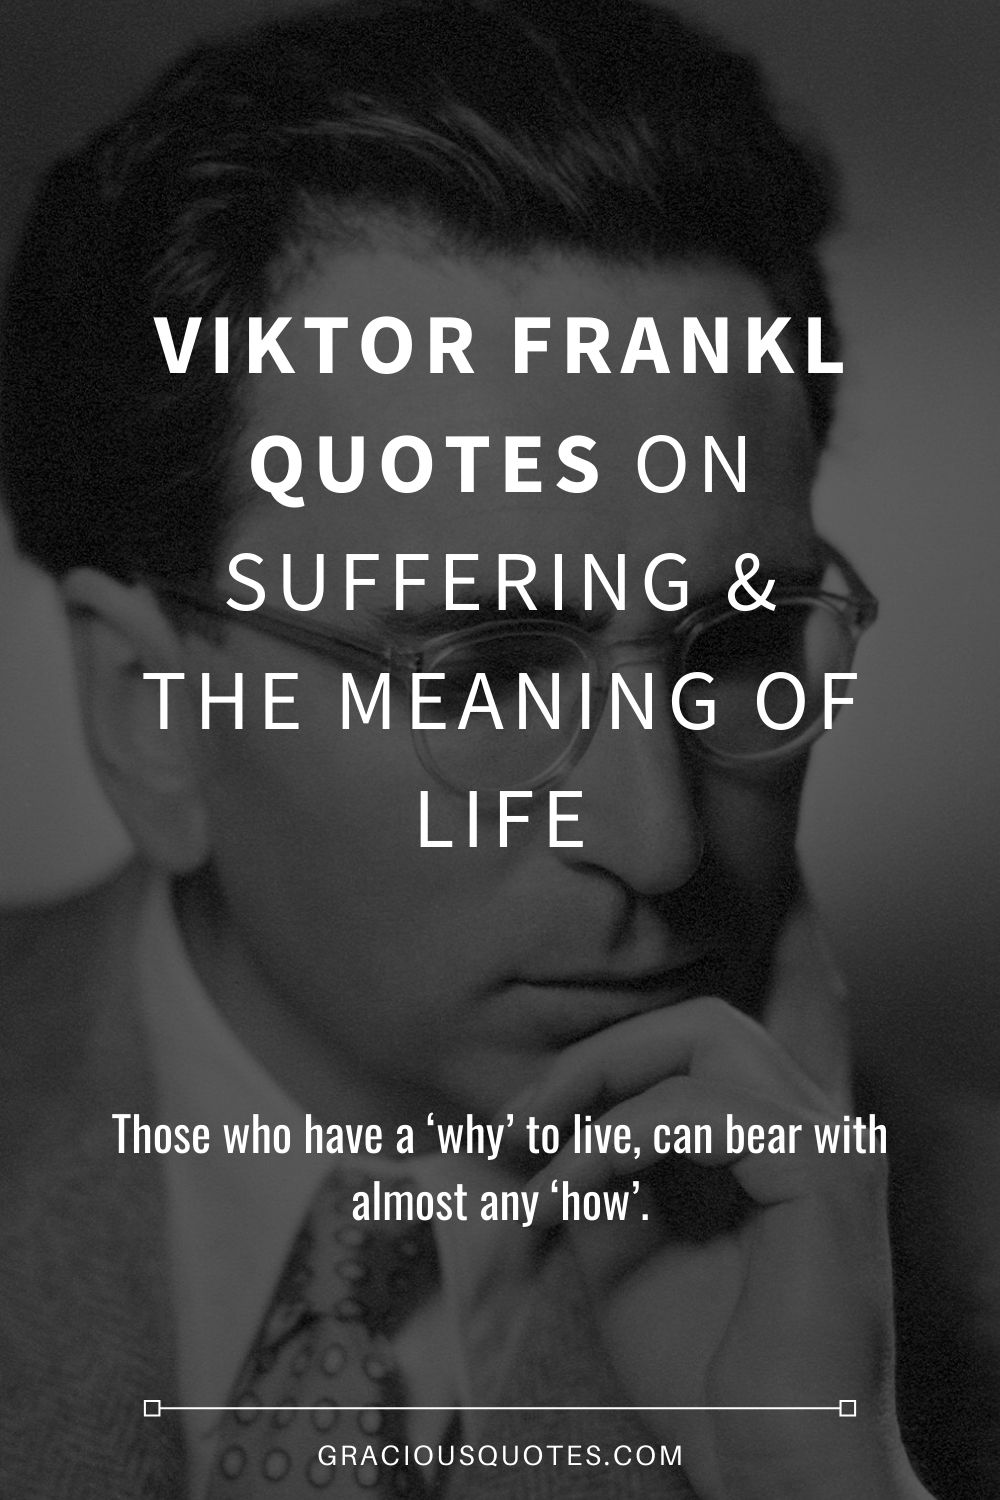 Viktor-Frankl-Quotes-on-Suffering-The-Meaning-of-Life-Gracious-Quotes